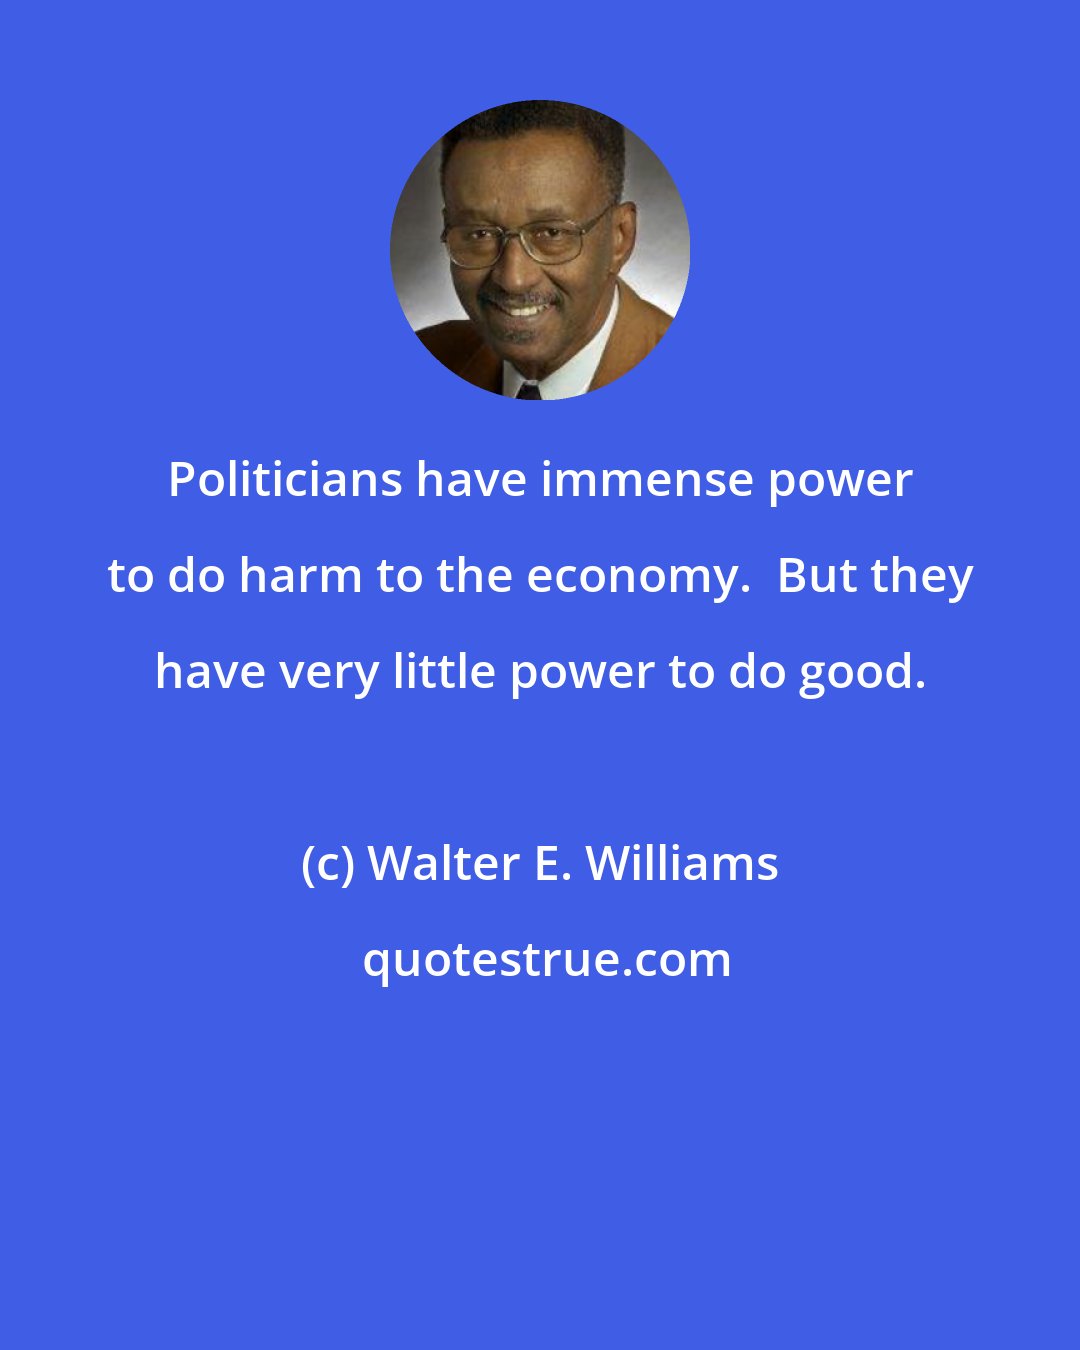 Walter E. Williams: Politicians have immense power to do harm to the economy.  But they have very little power to do good.